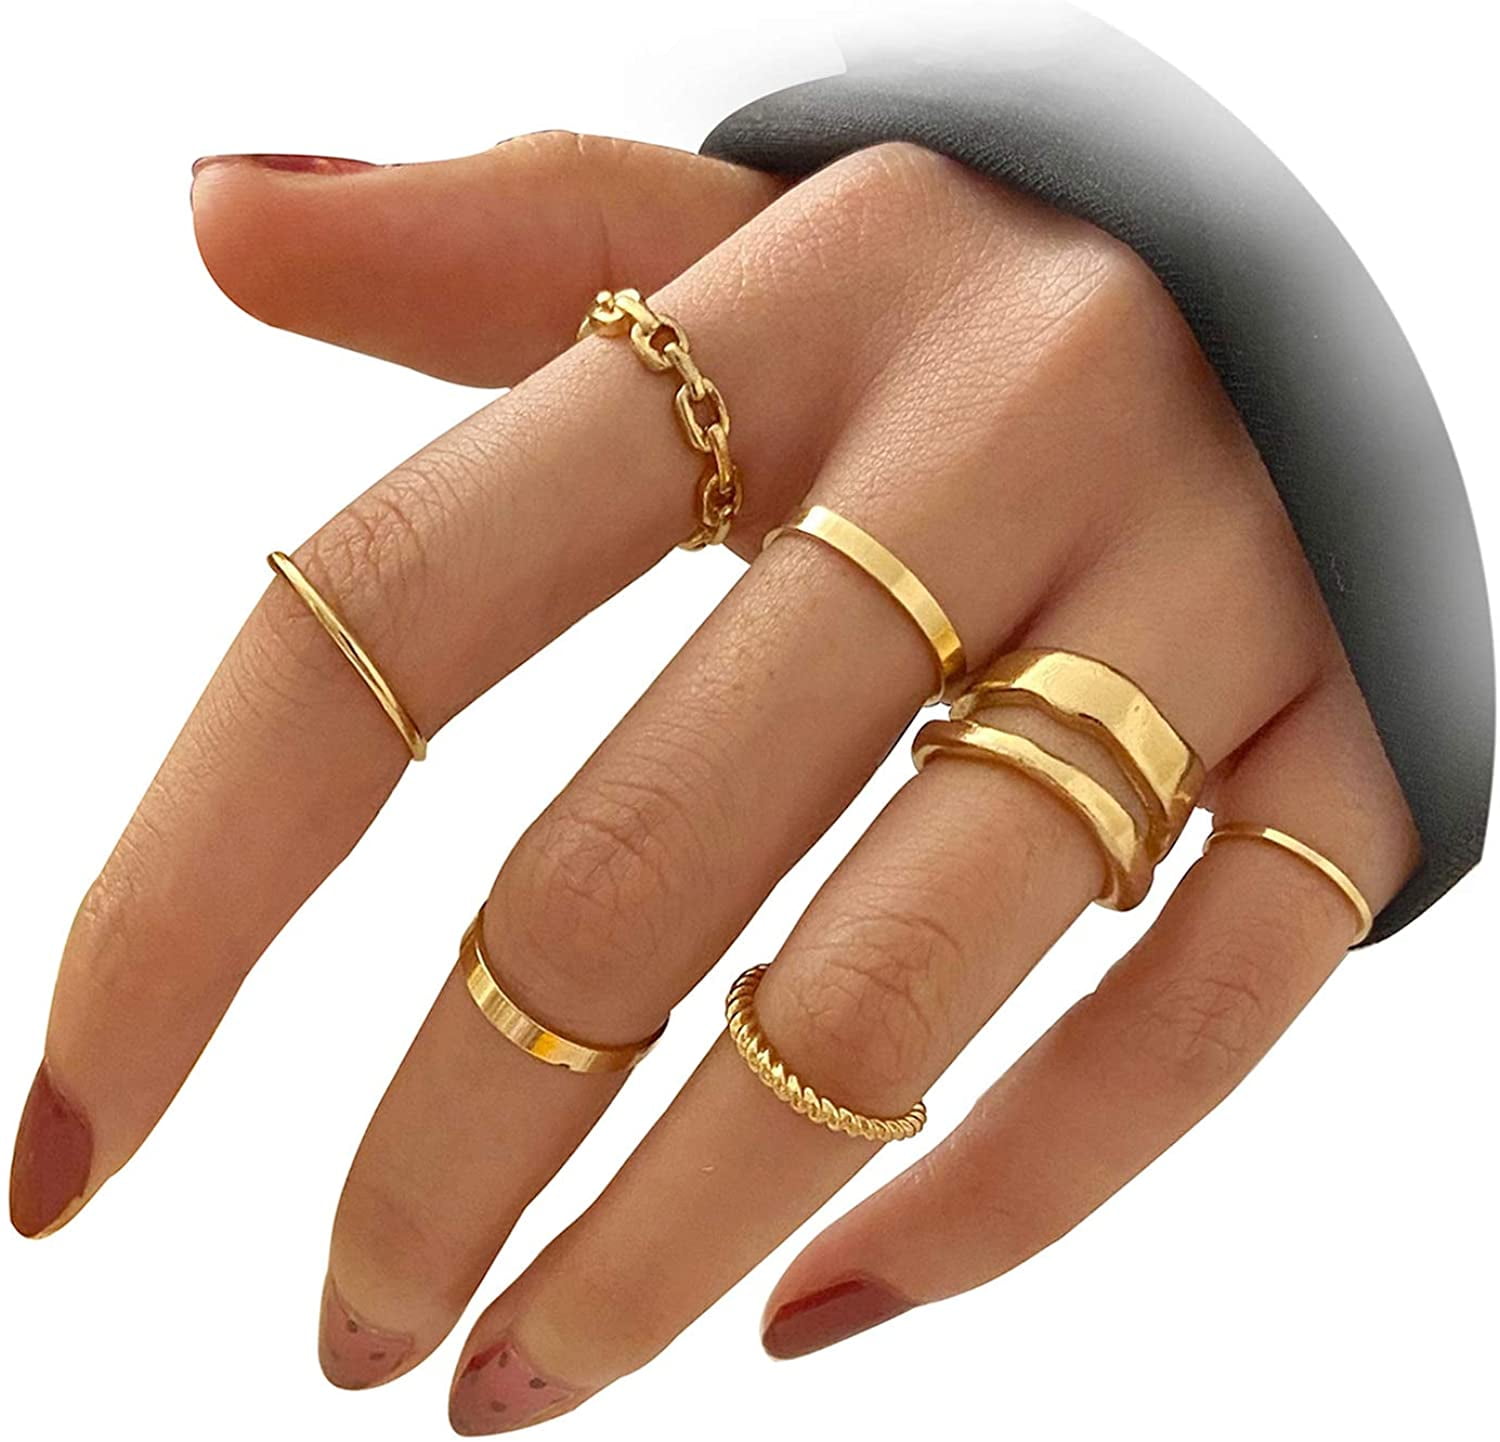 Women's Jewelry Urban Rings stack Above Knuckle Ring Band Midi Finger Ring set 